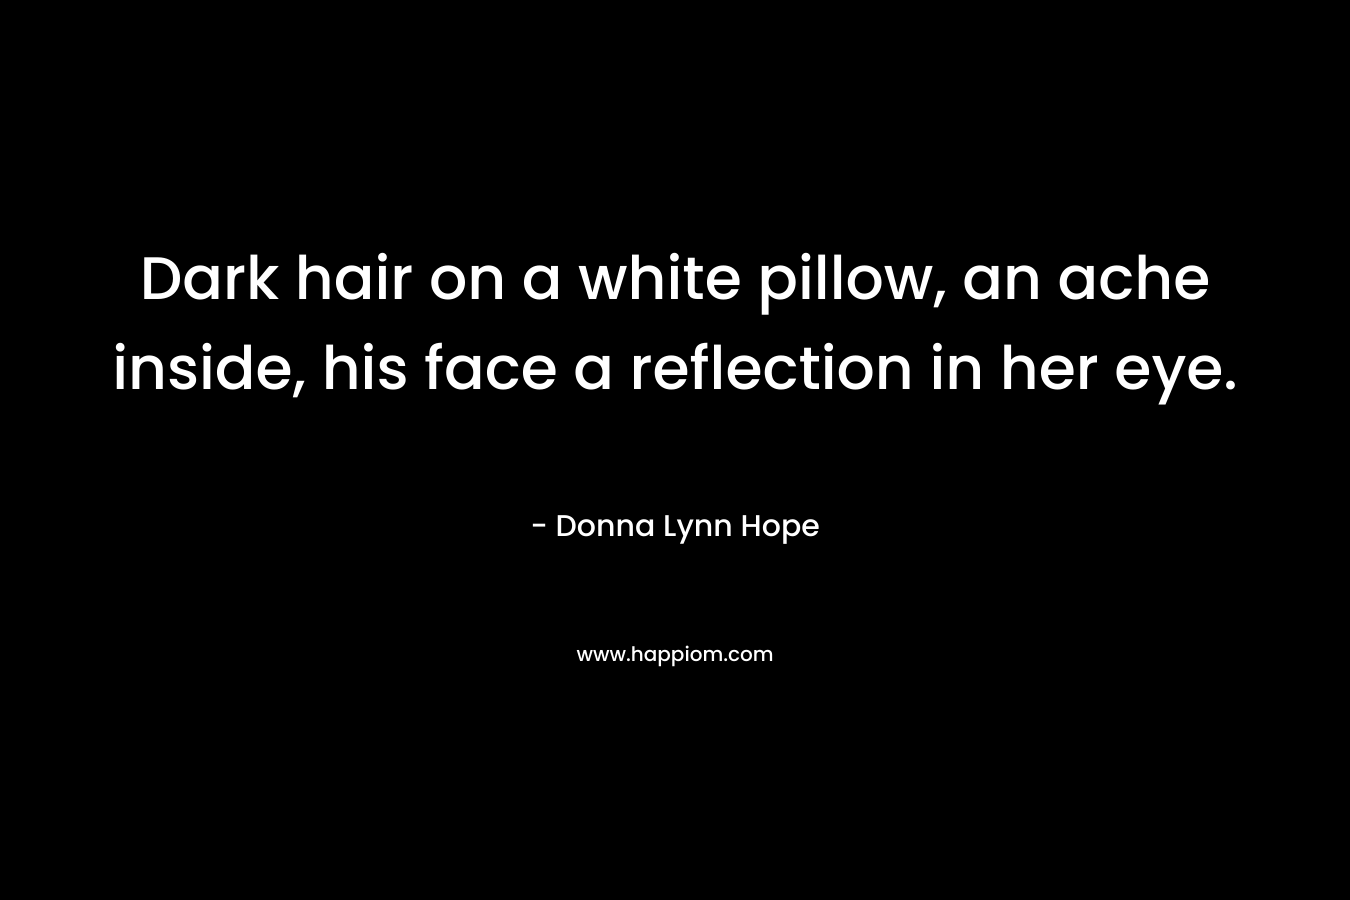 Dark hair on a white pillow, an ache inside, his face a reflection in her eye.